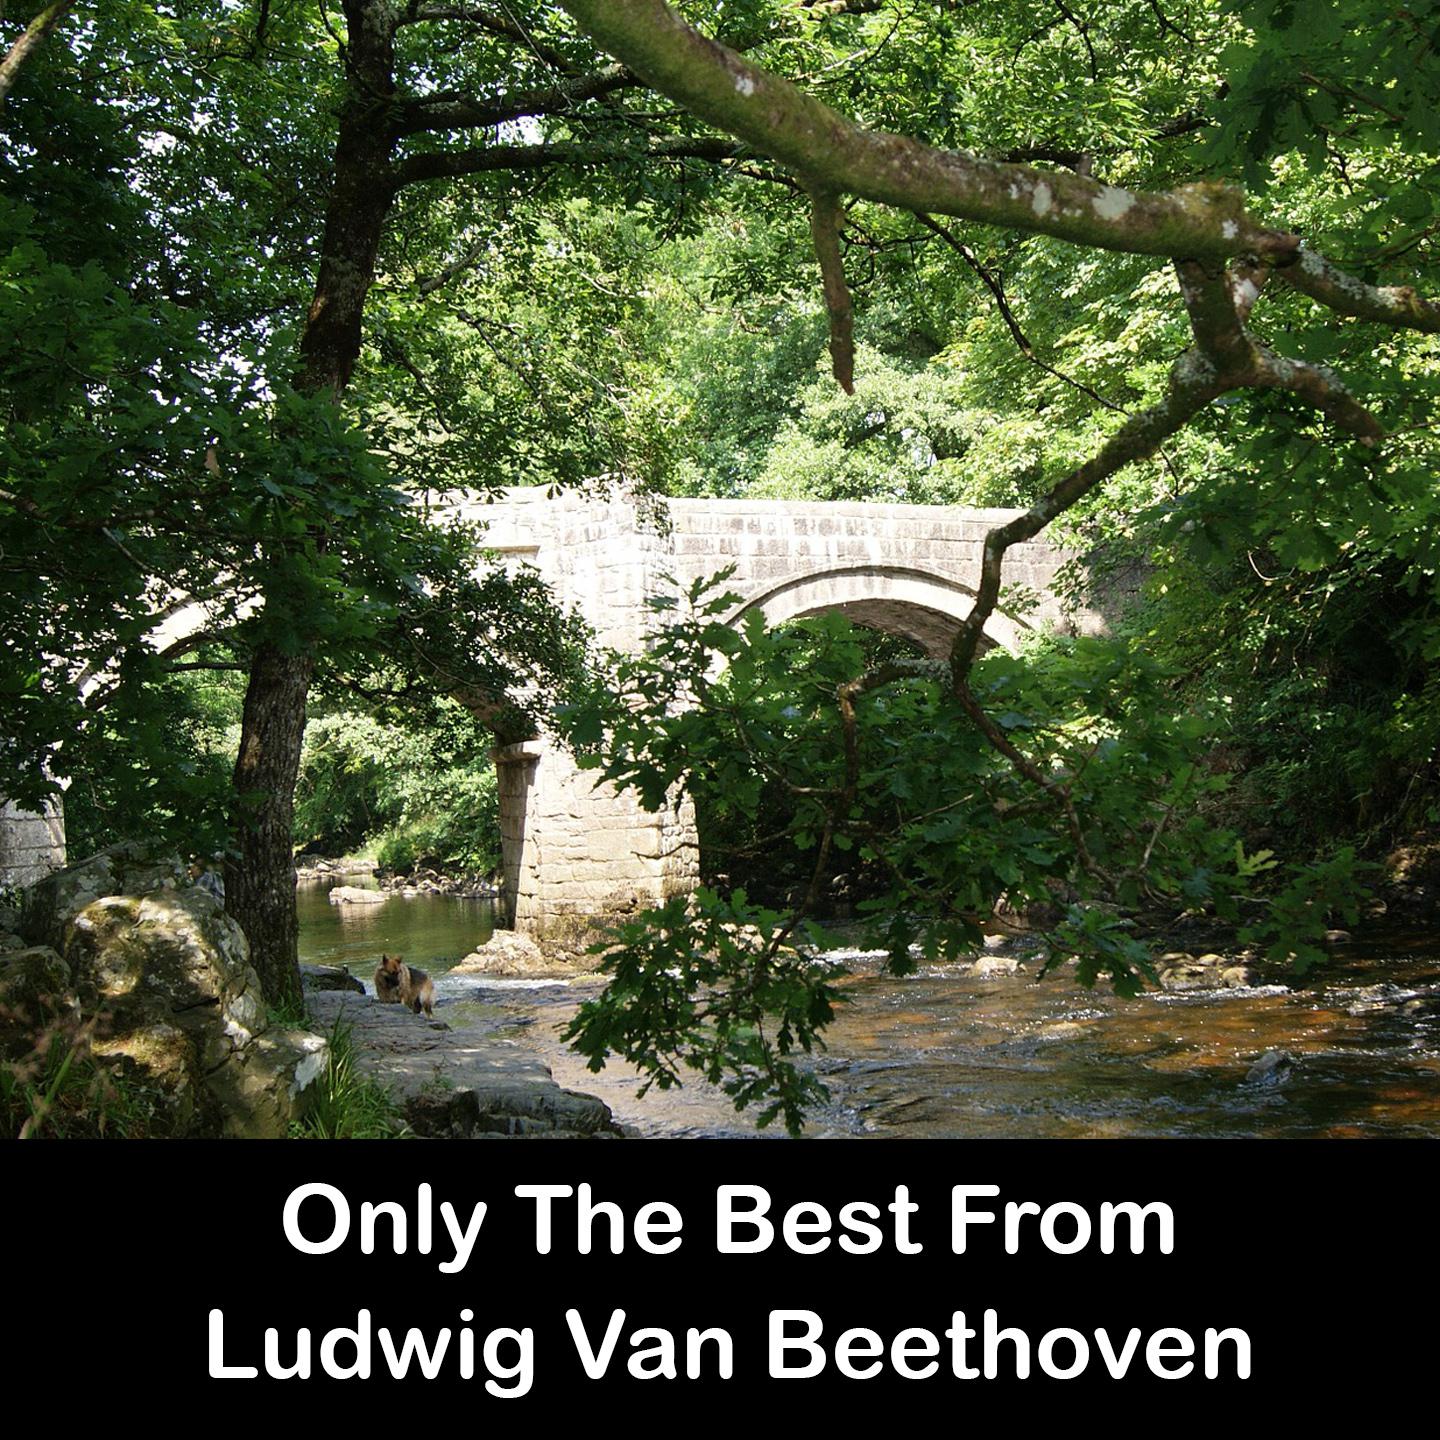 Only The Best From Ludwig Van Beethoven